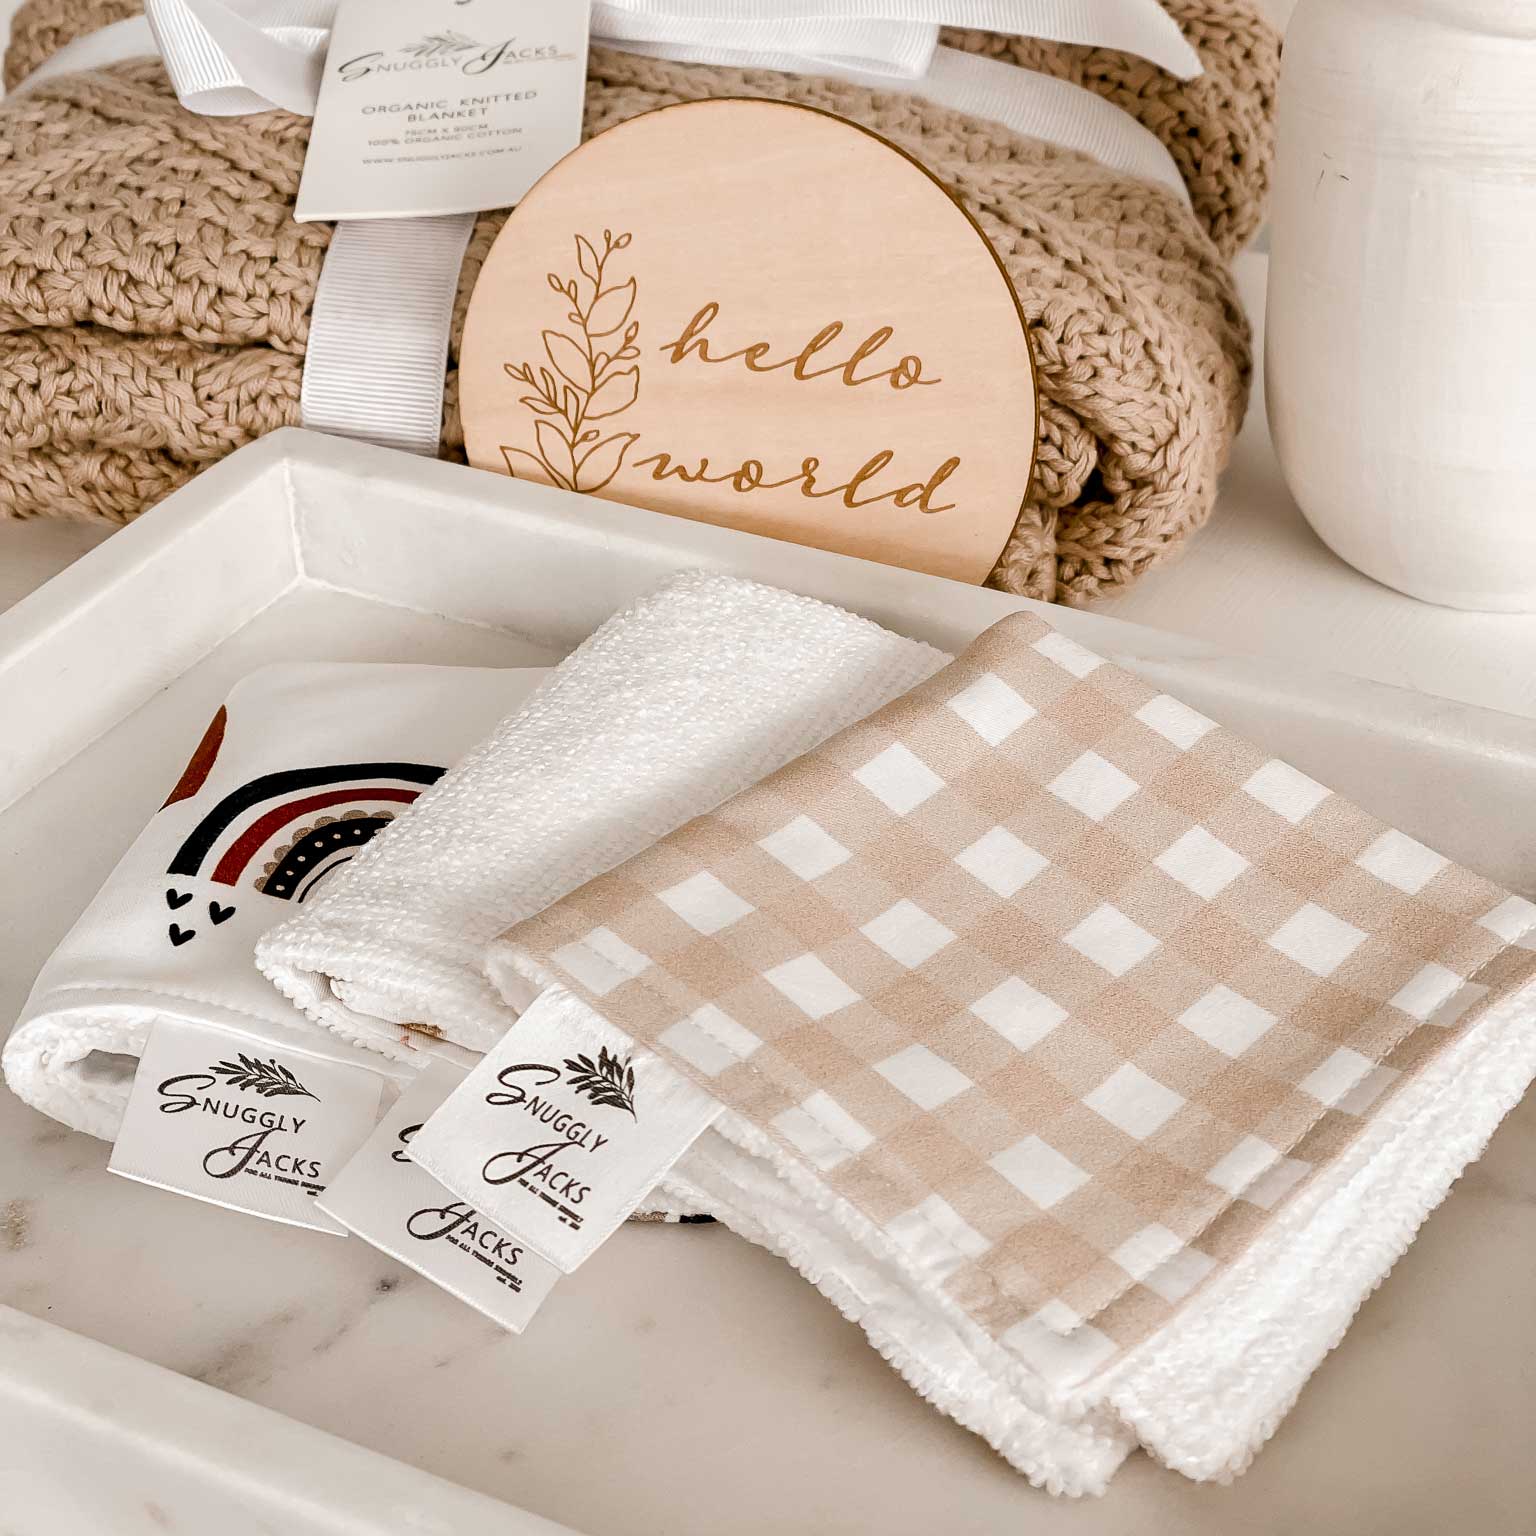 3 folded snuggly jacks Canada wash cloths, save money and bundle our cotton products.